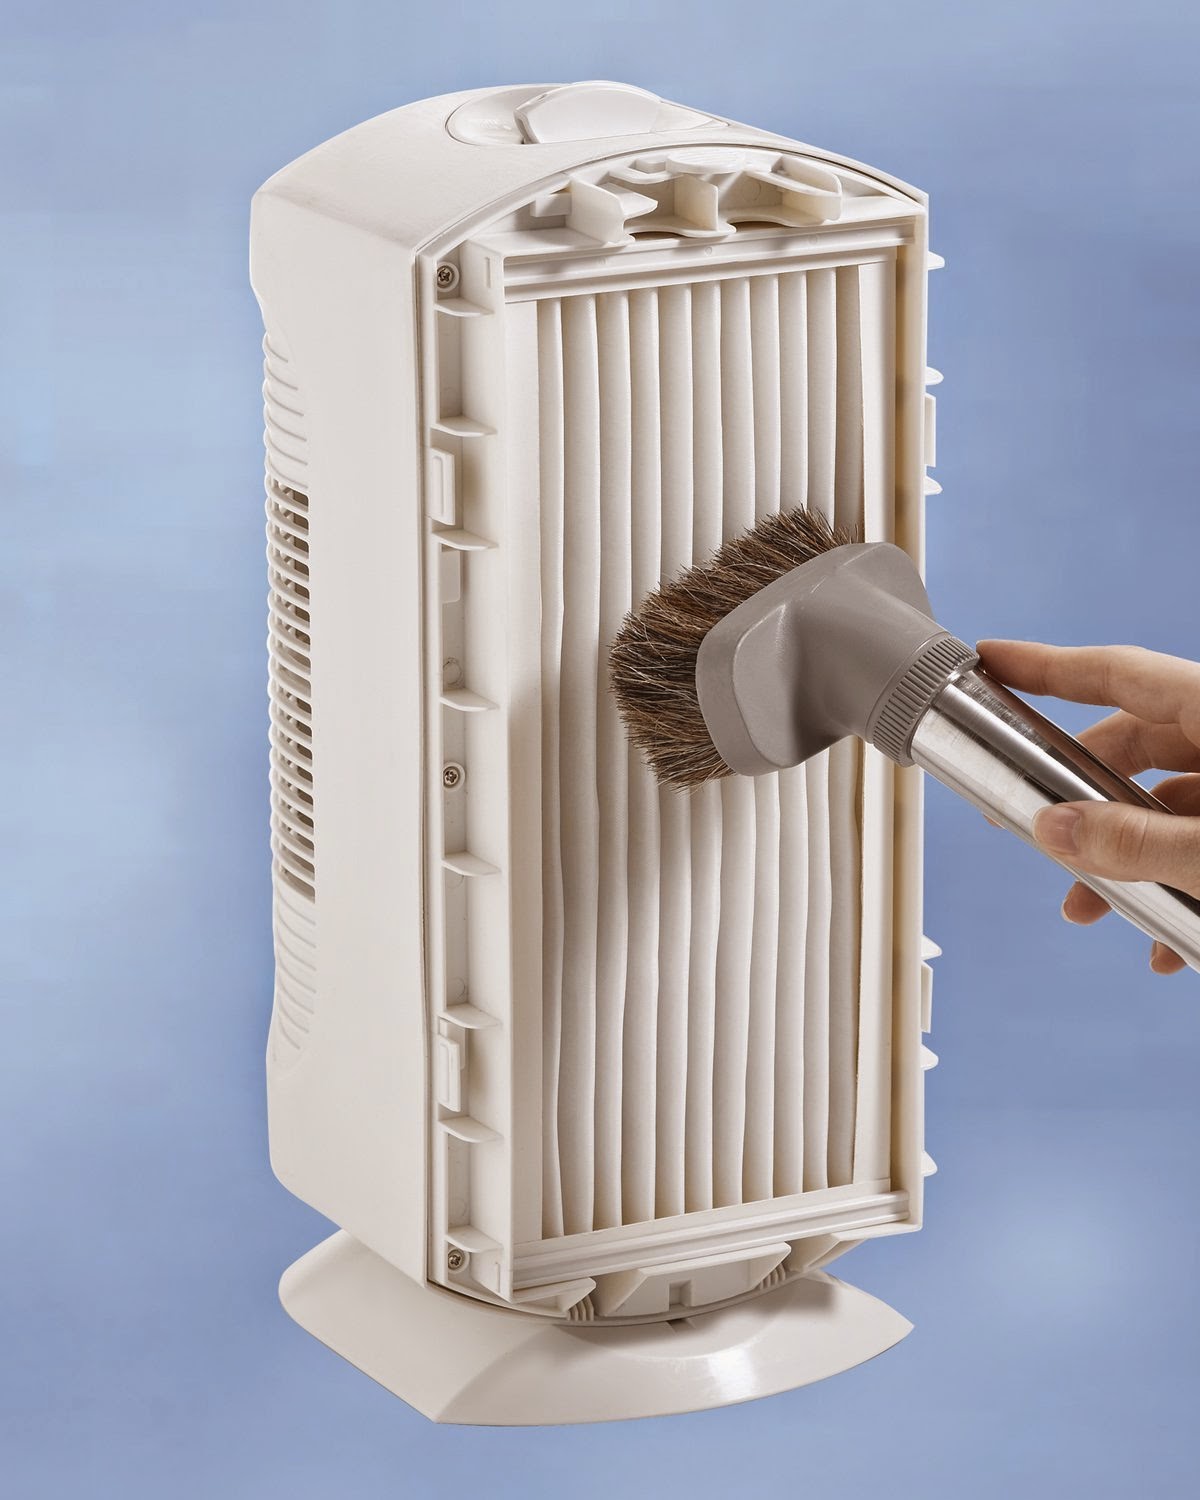 Permanent Filter in the Hamilton Beach Air Cleaner simply needs cleaning with a vacuum cleaner